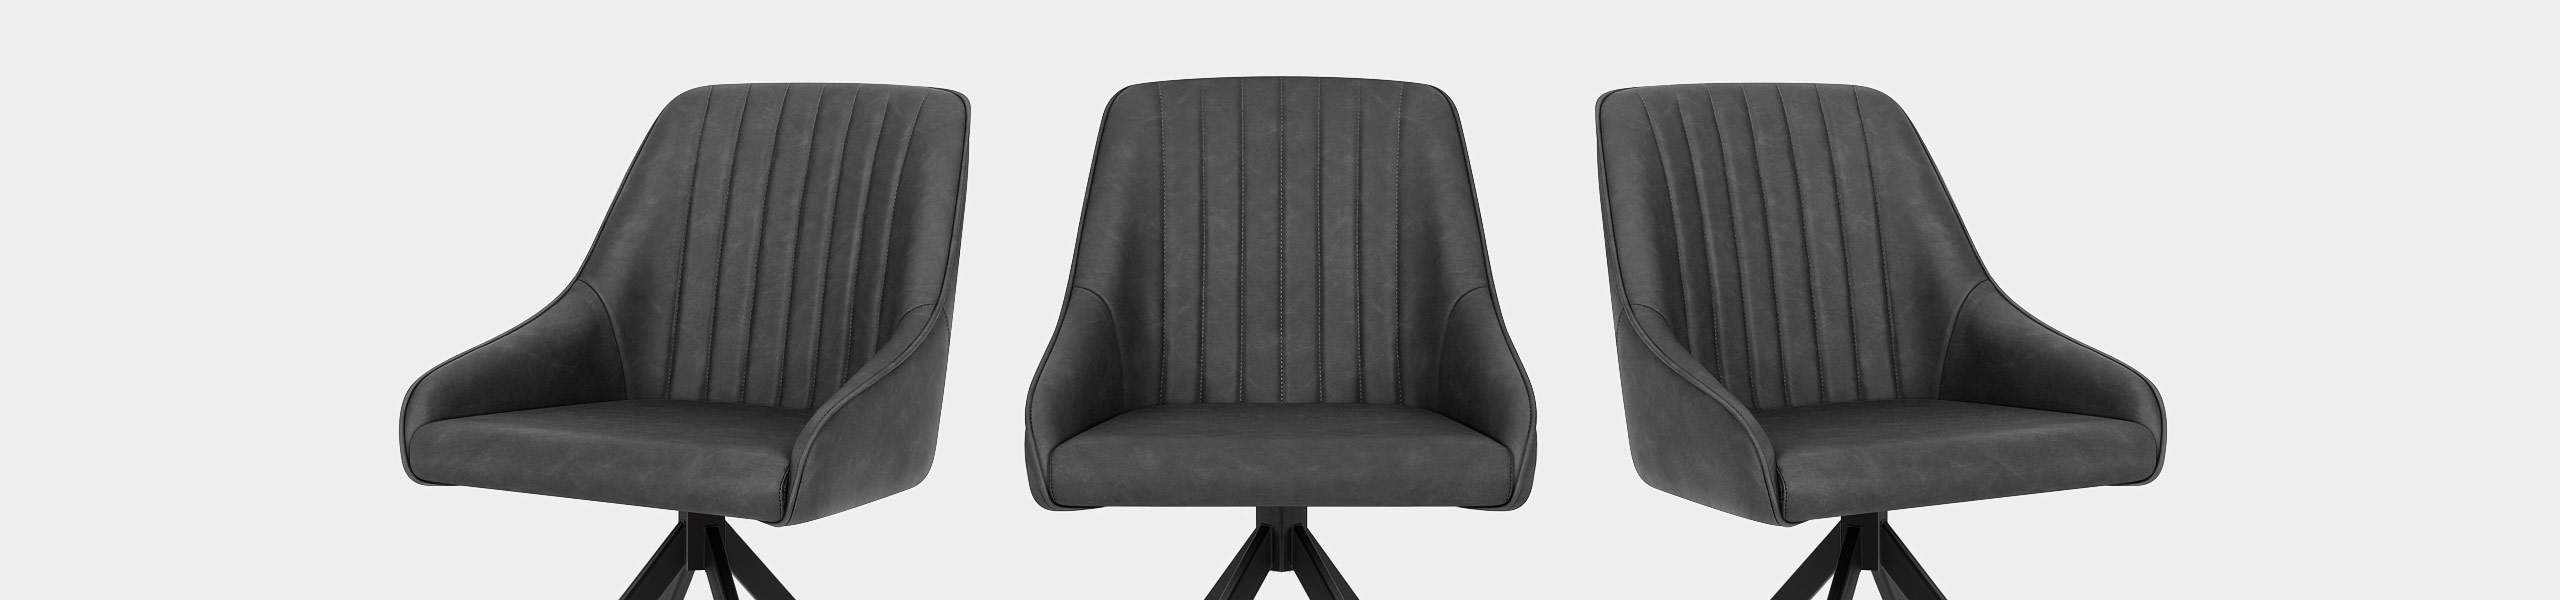 Amelia Chair Charcoal Video Banner